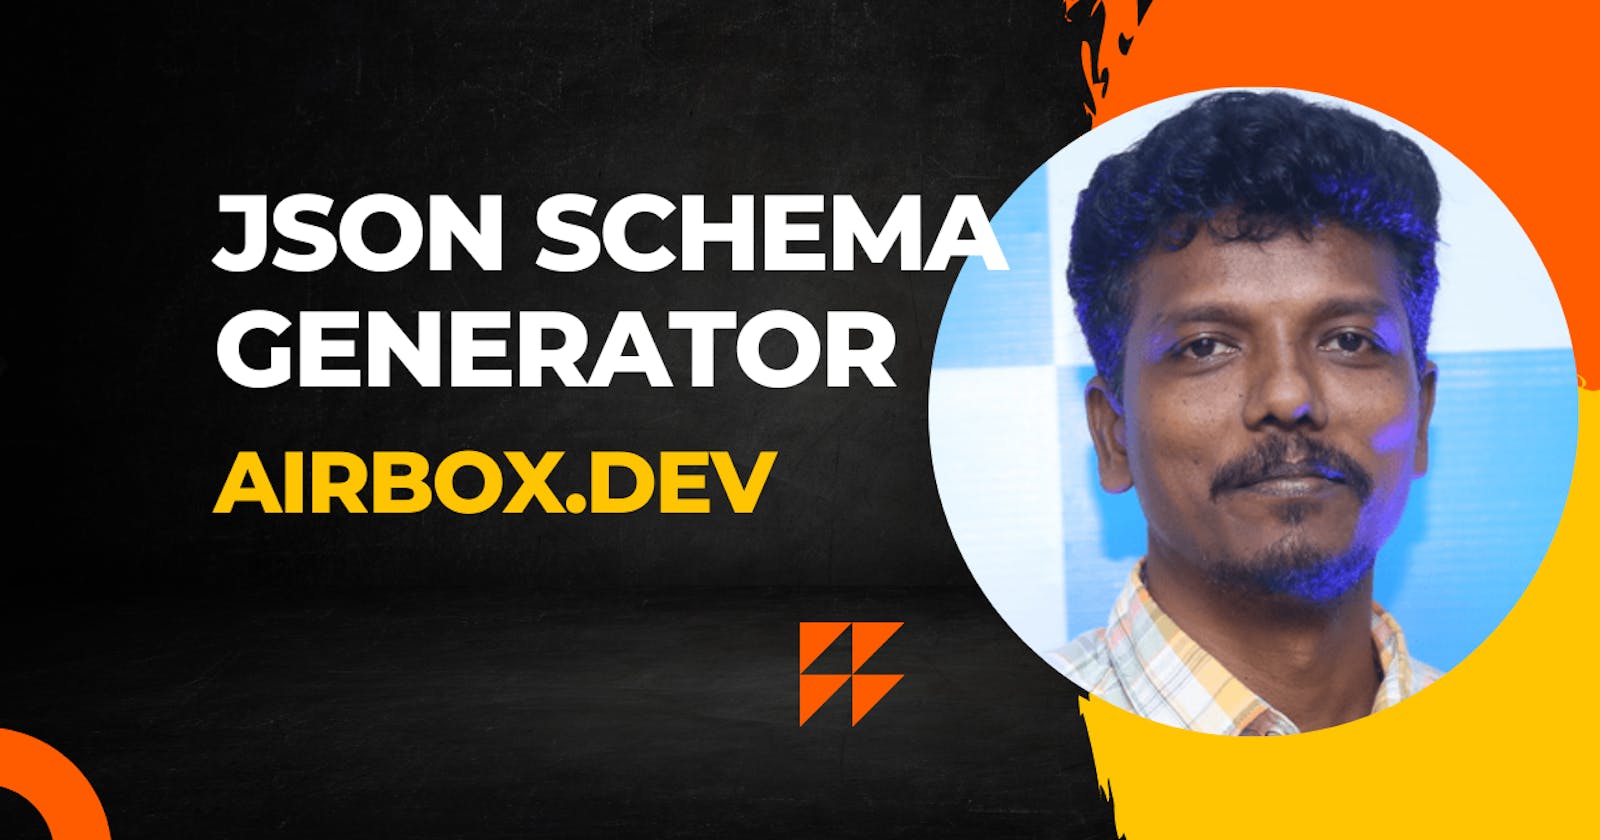 JSON Schema Generator is available in airbox.dev